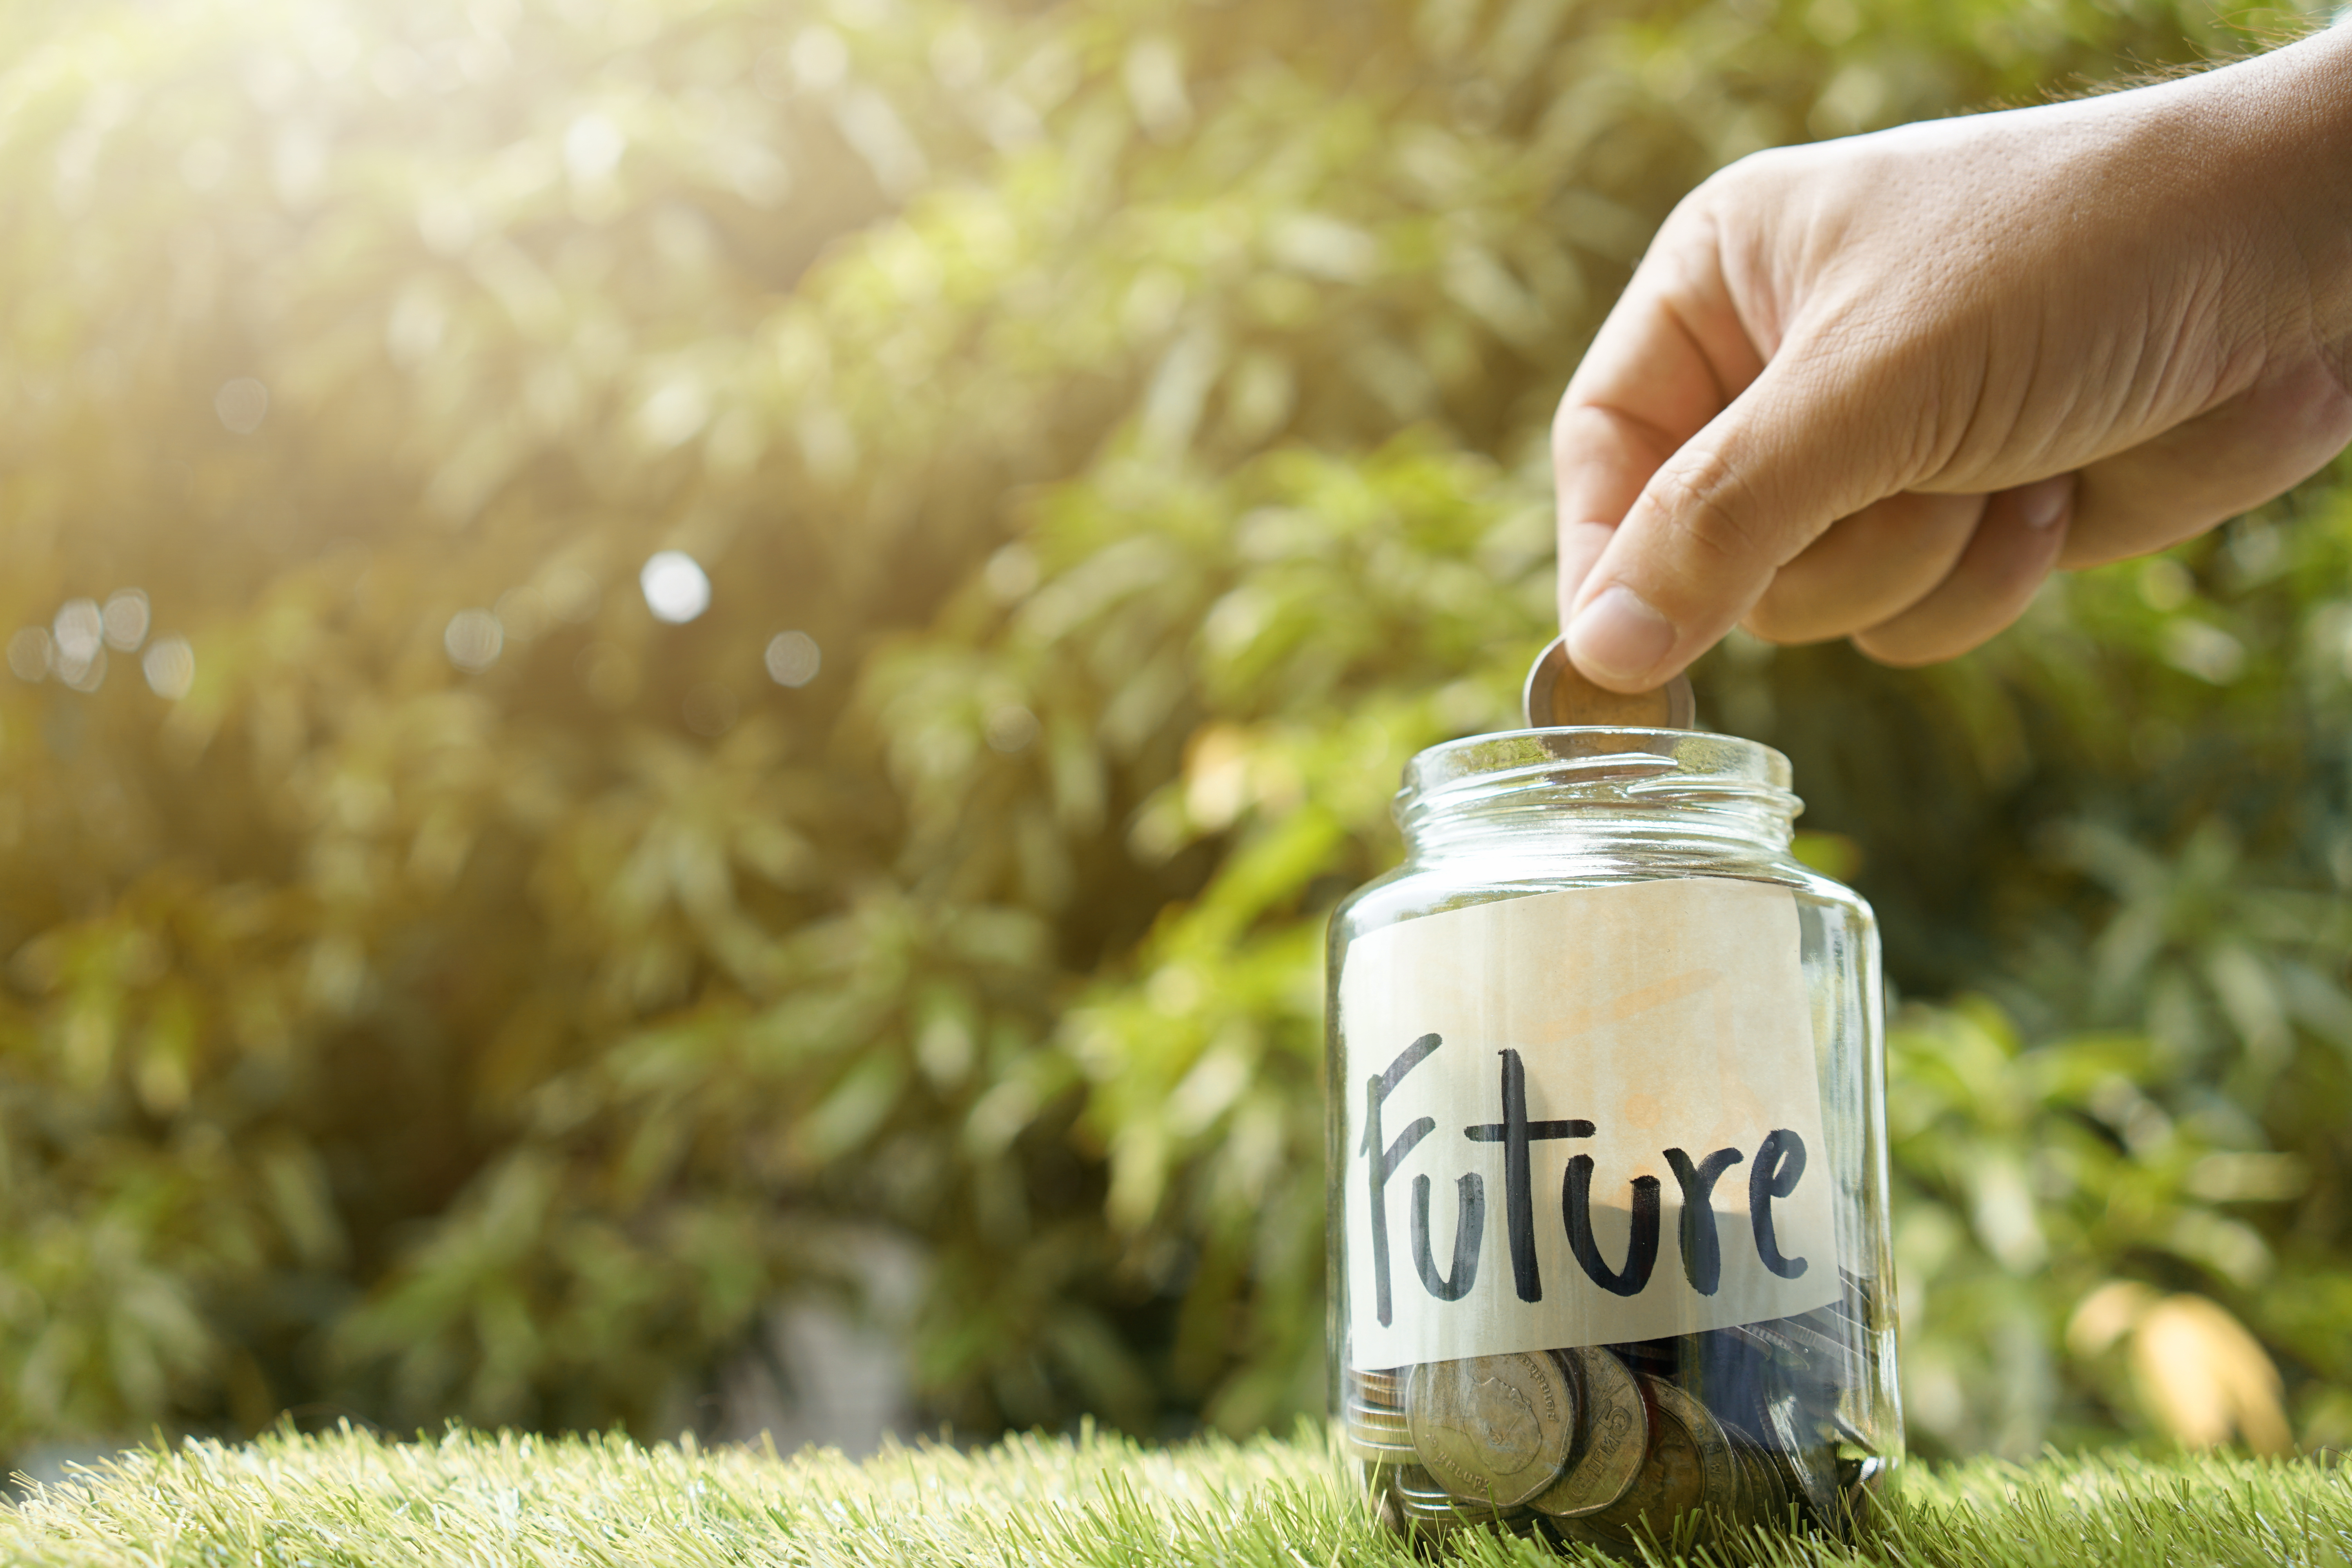 hand dropping change into glass jar labeled "future"